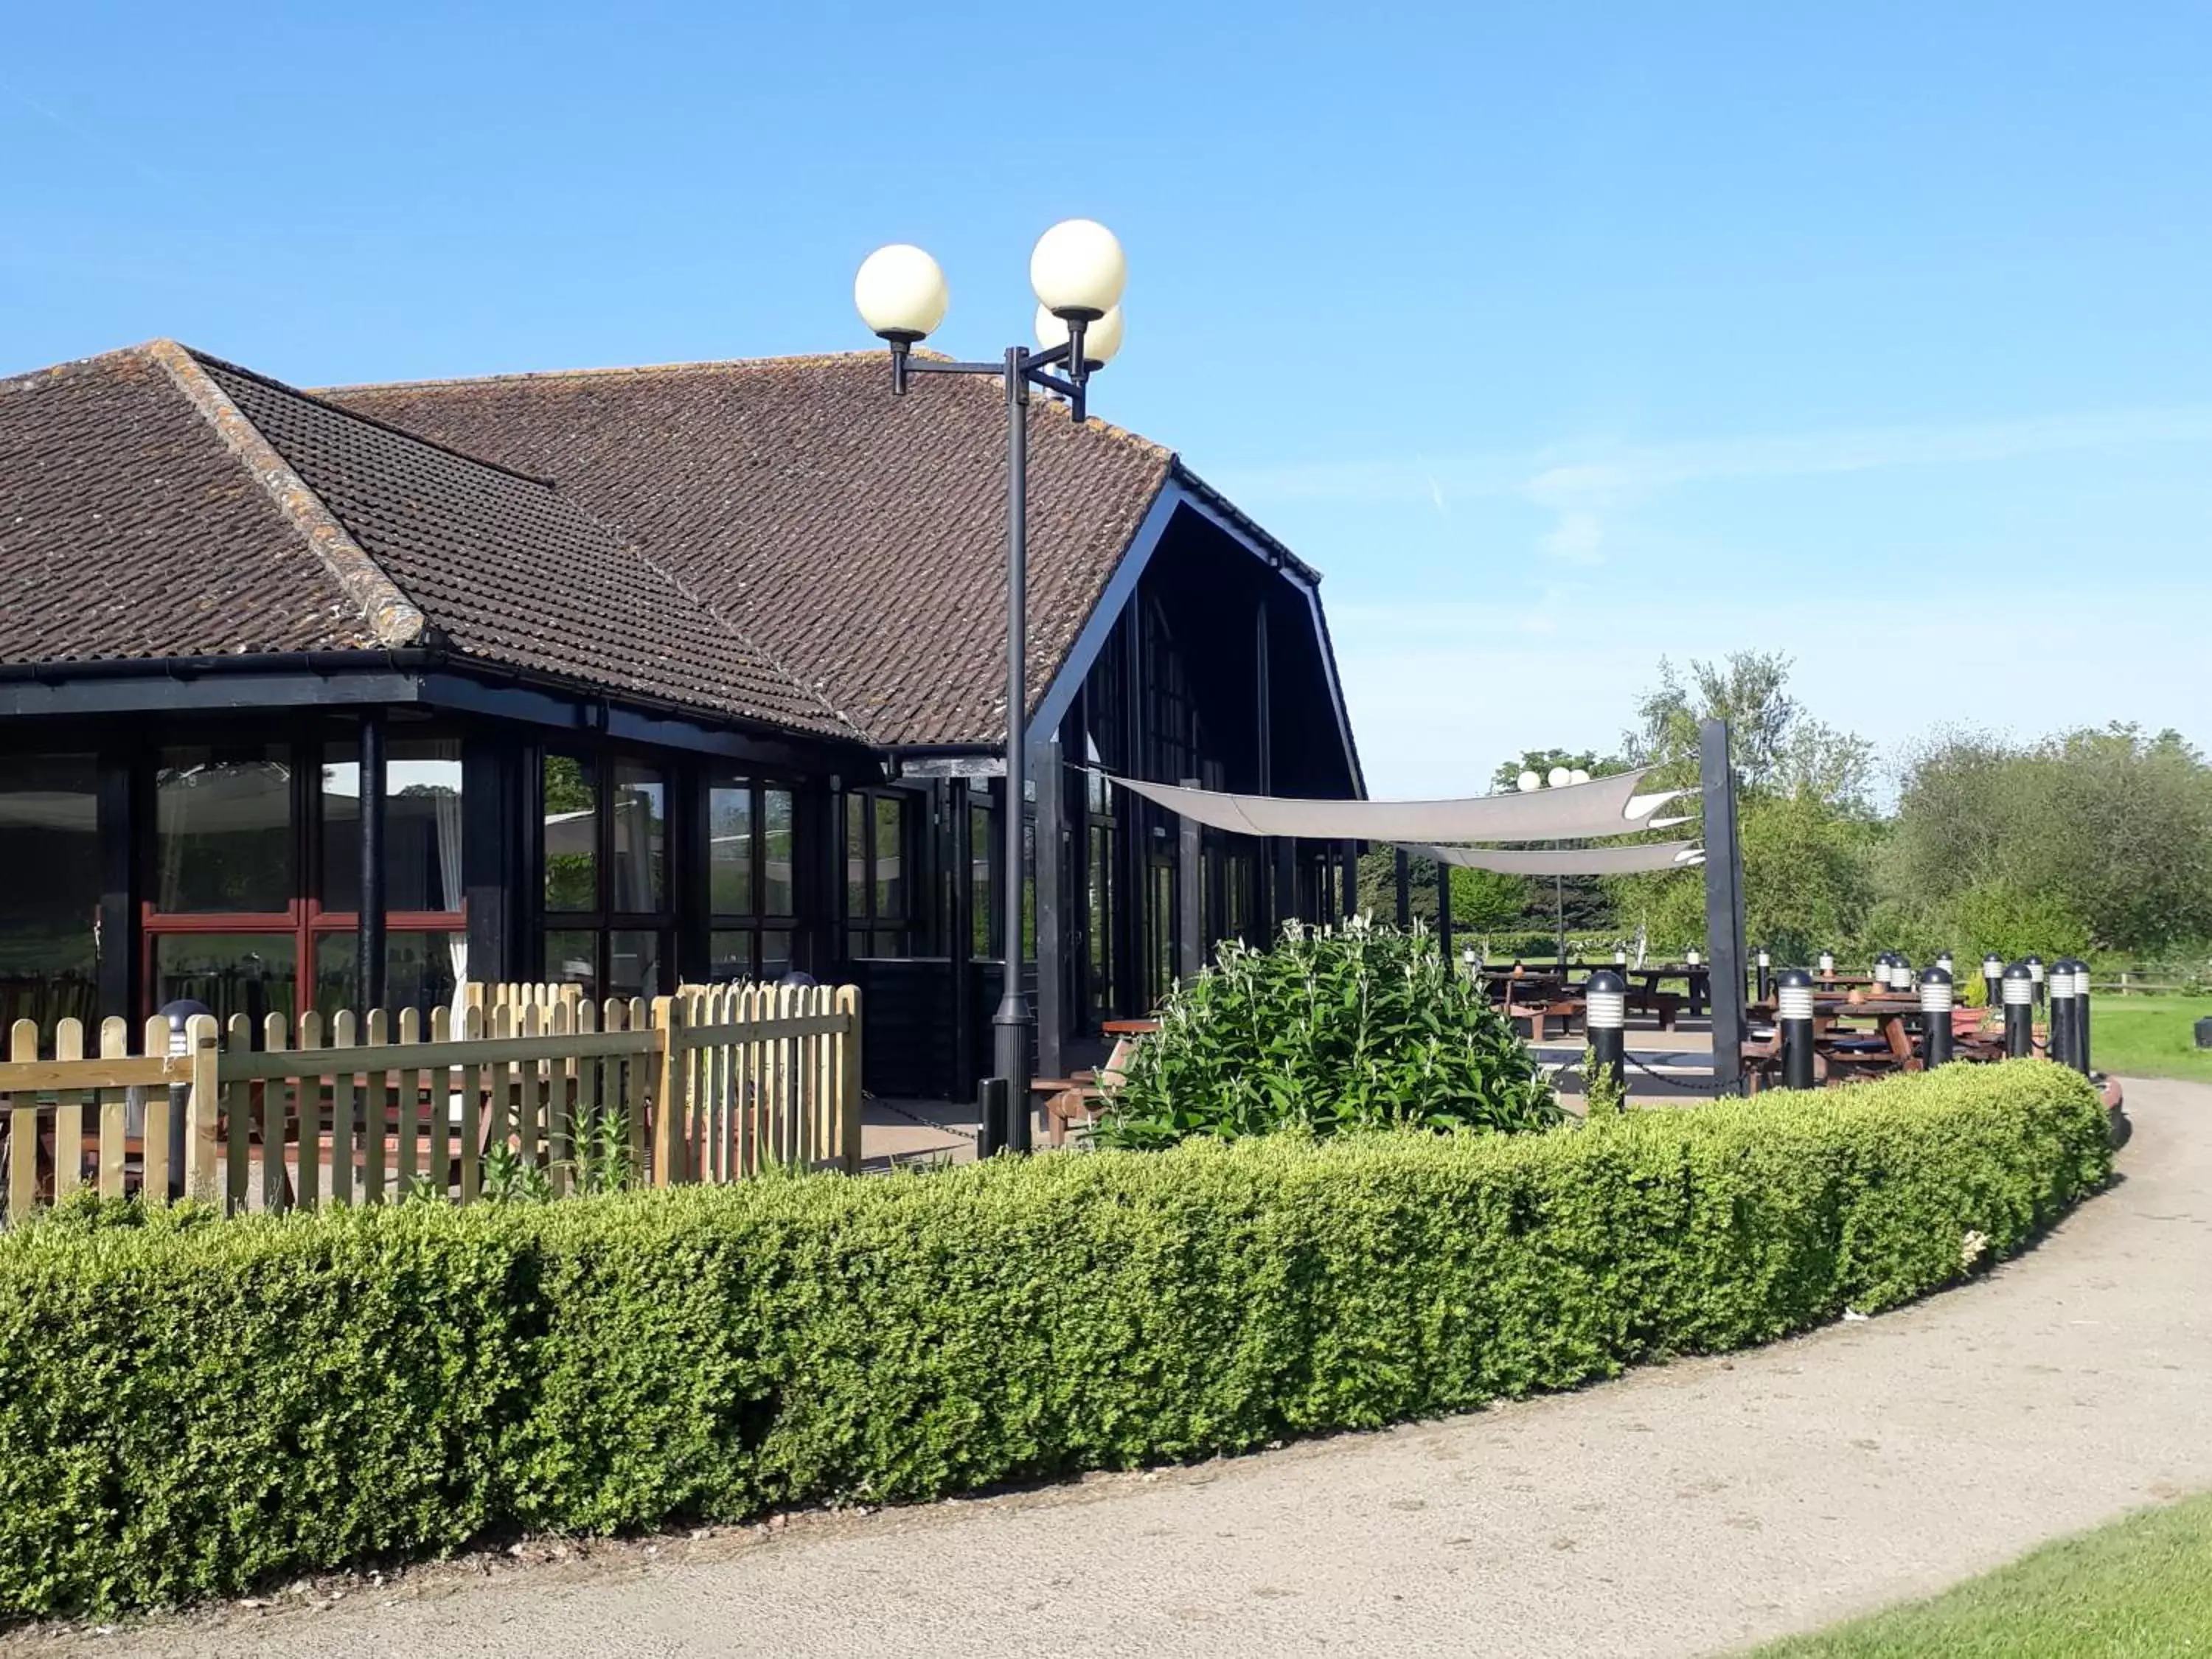 Property Building in Weald of Kent Golf Course and Hotel